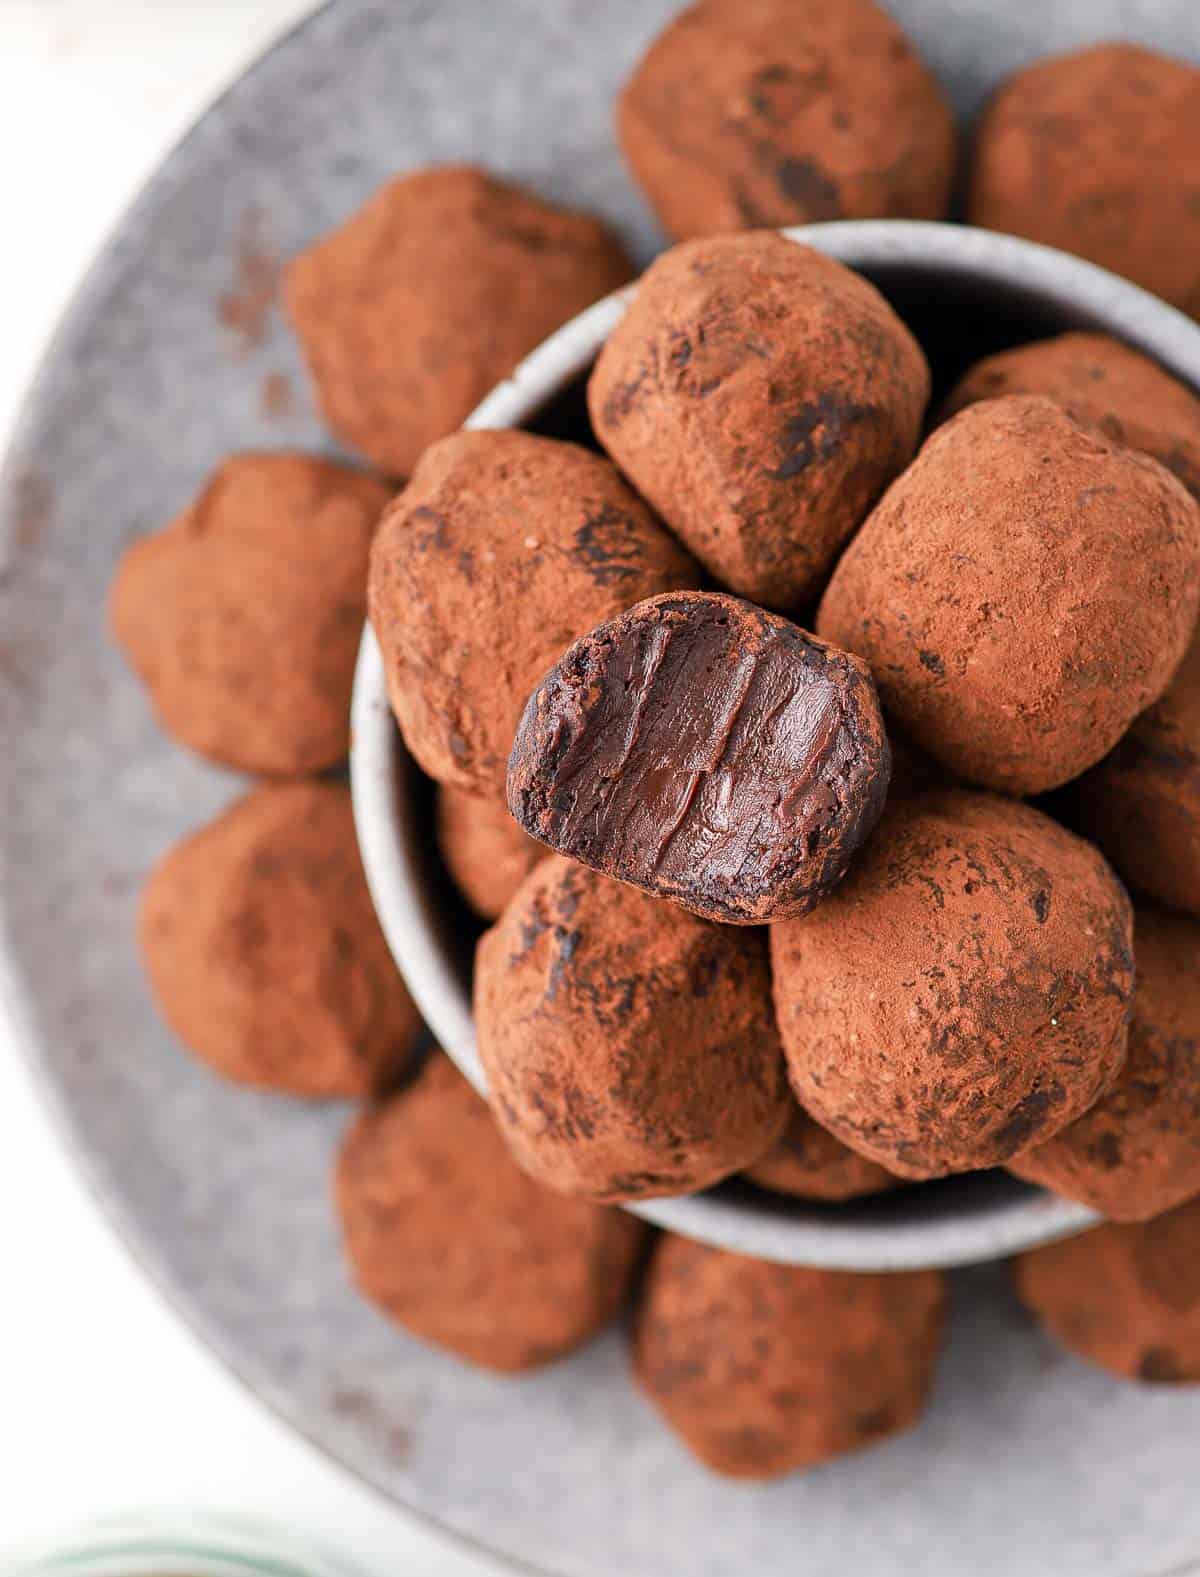 Chocolate balls seen from above stacked in a grey bowl.